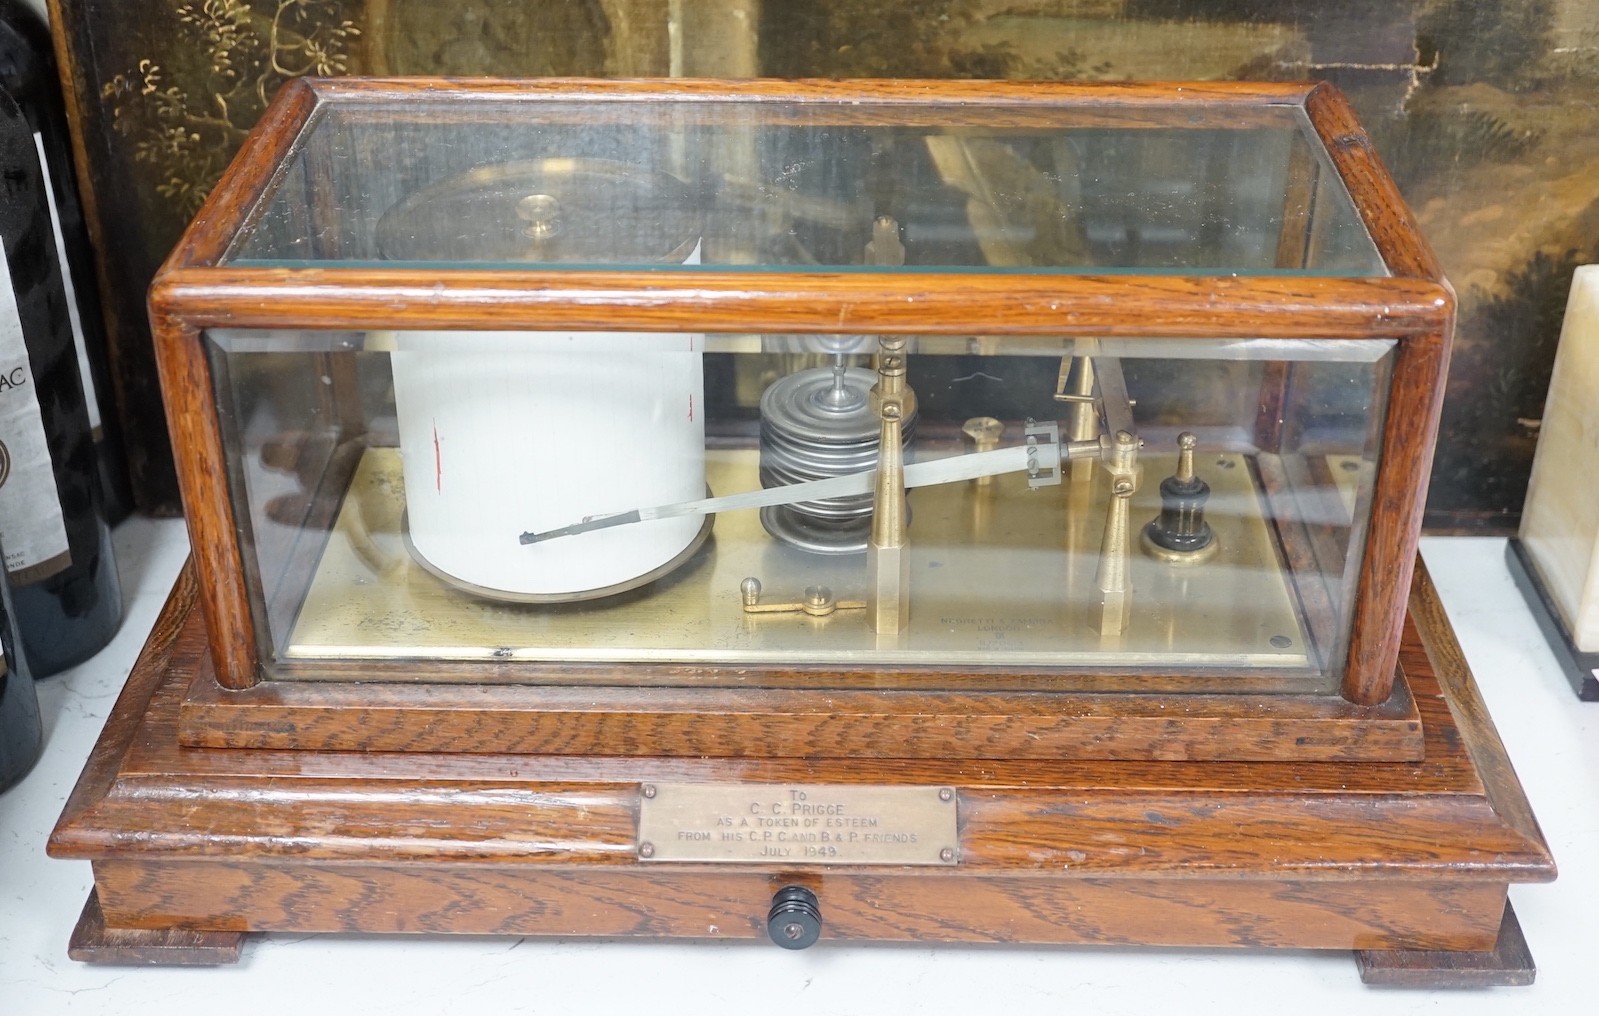 A Negretti and Zambra oak cased barograph number R/20613 with plaque reading ‘To C.C. Prigge as a token of esteem from his C.P.C. and B&P friends July 1949’